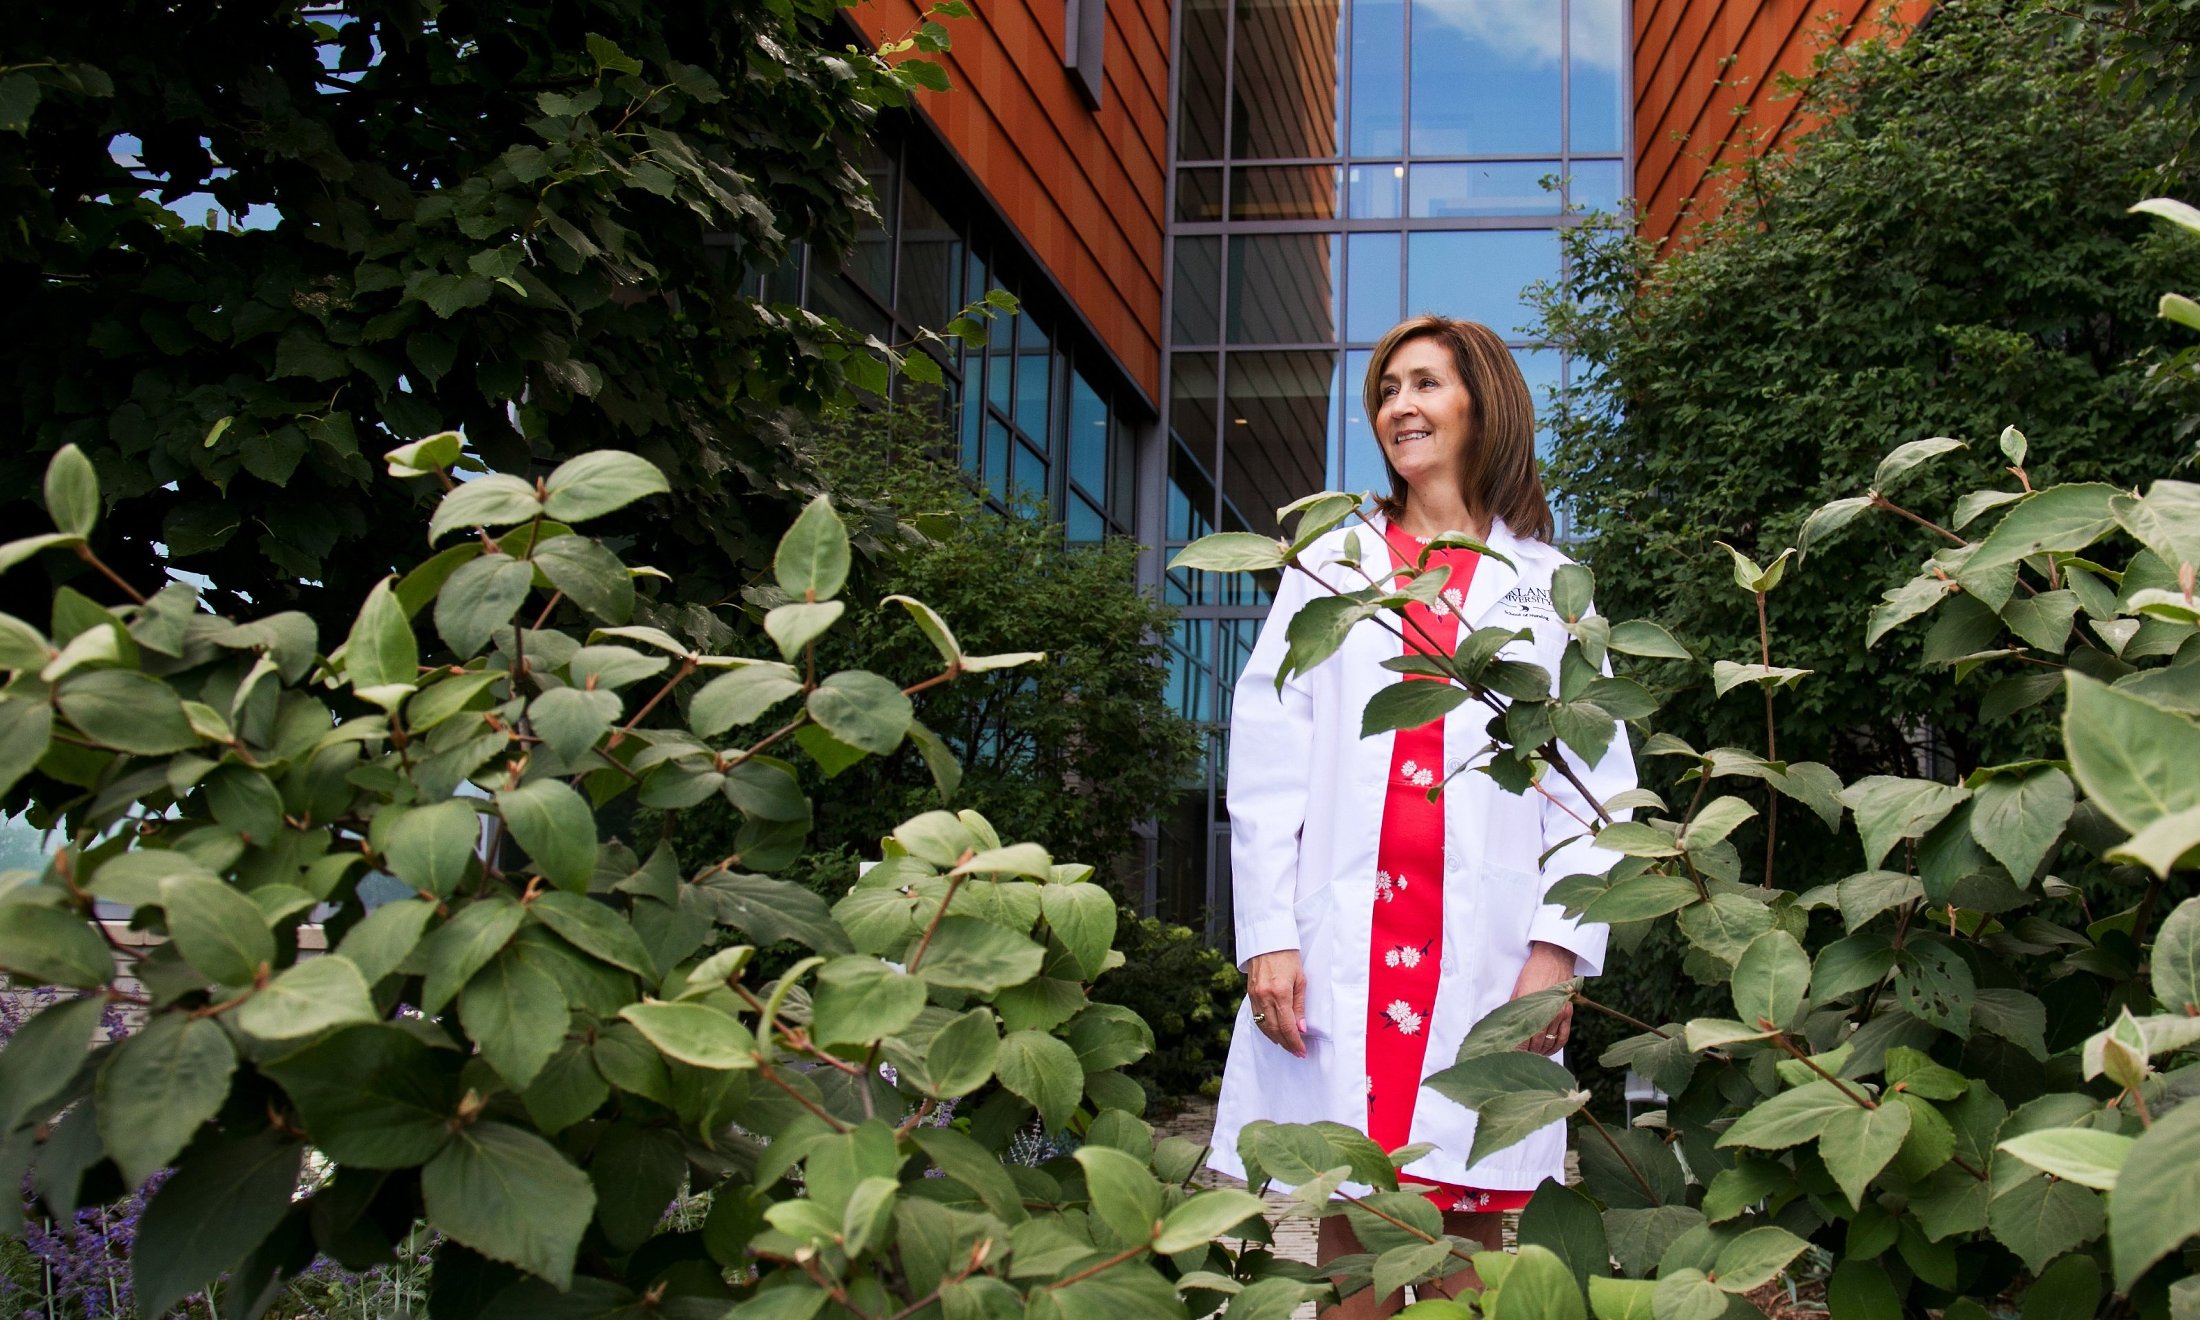 Andrea Bittinger standing behind some greenery outside of a building